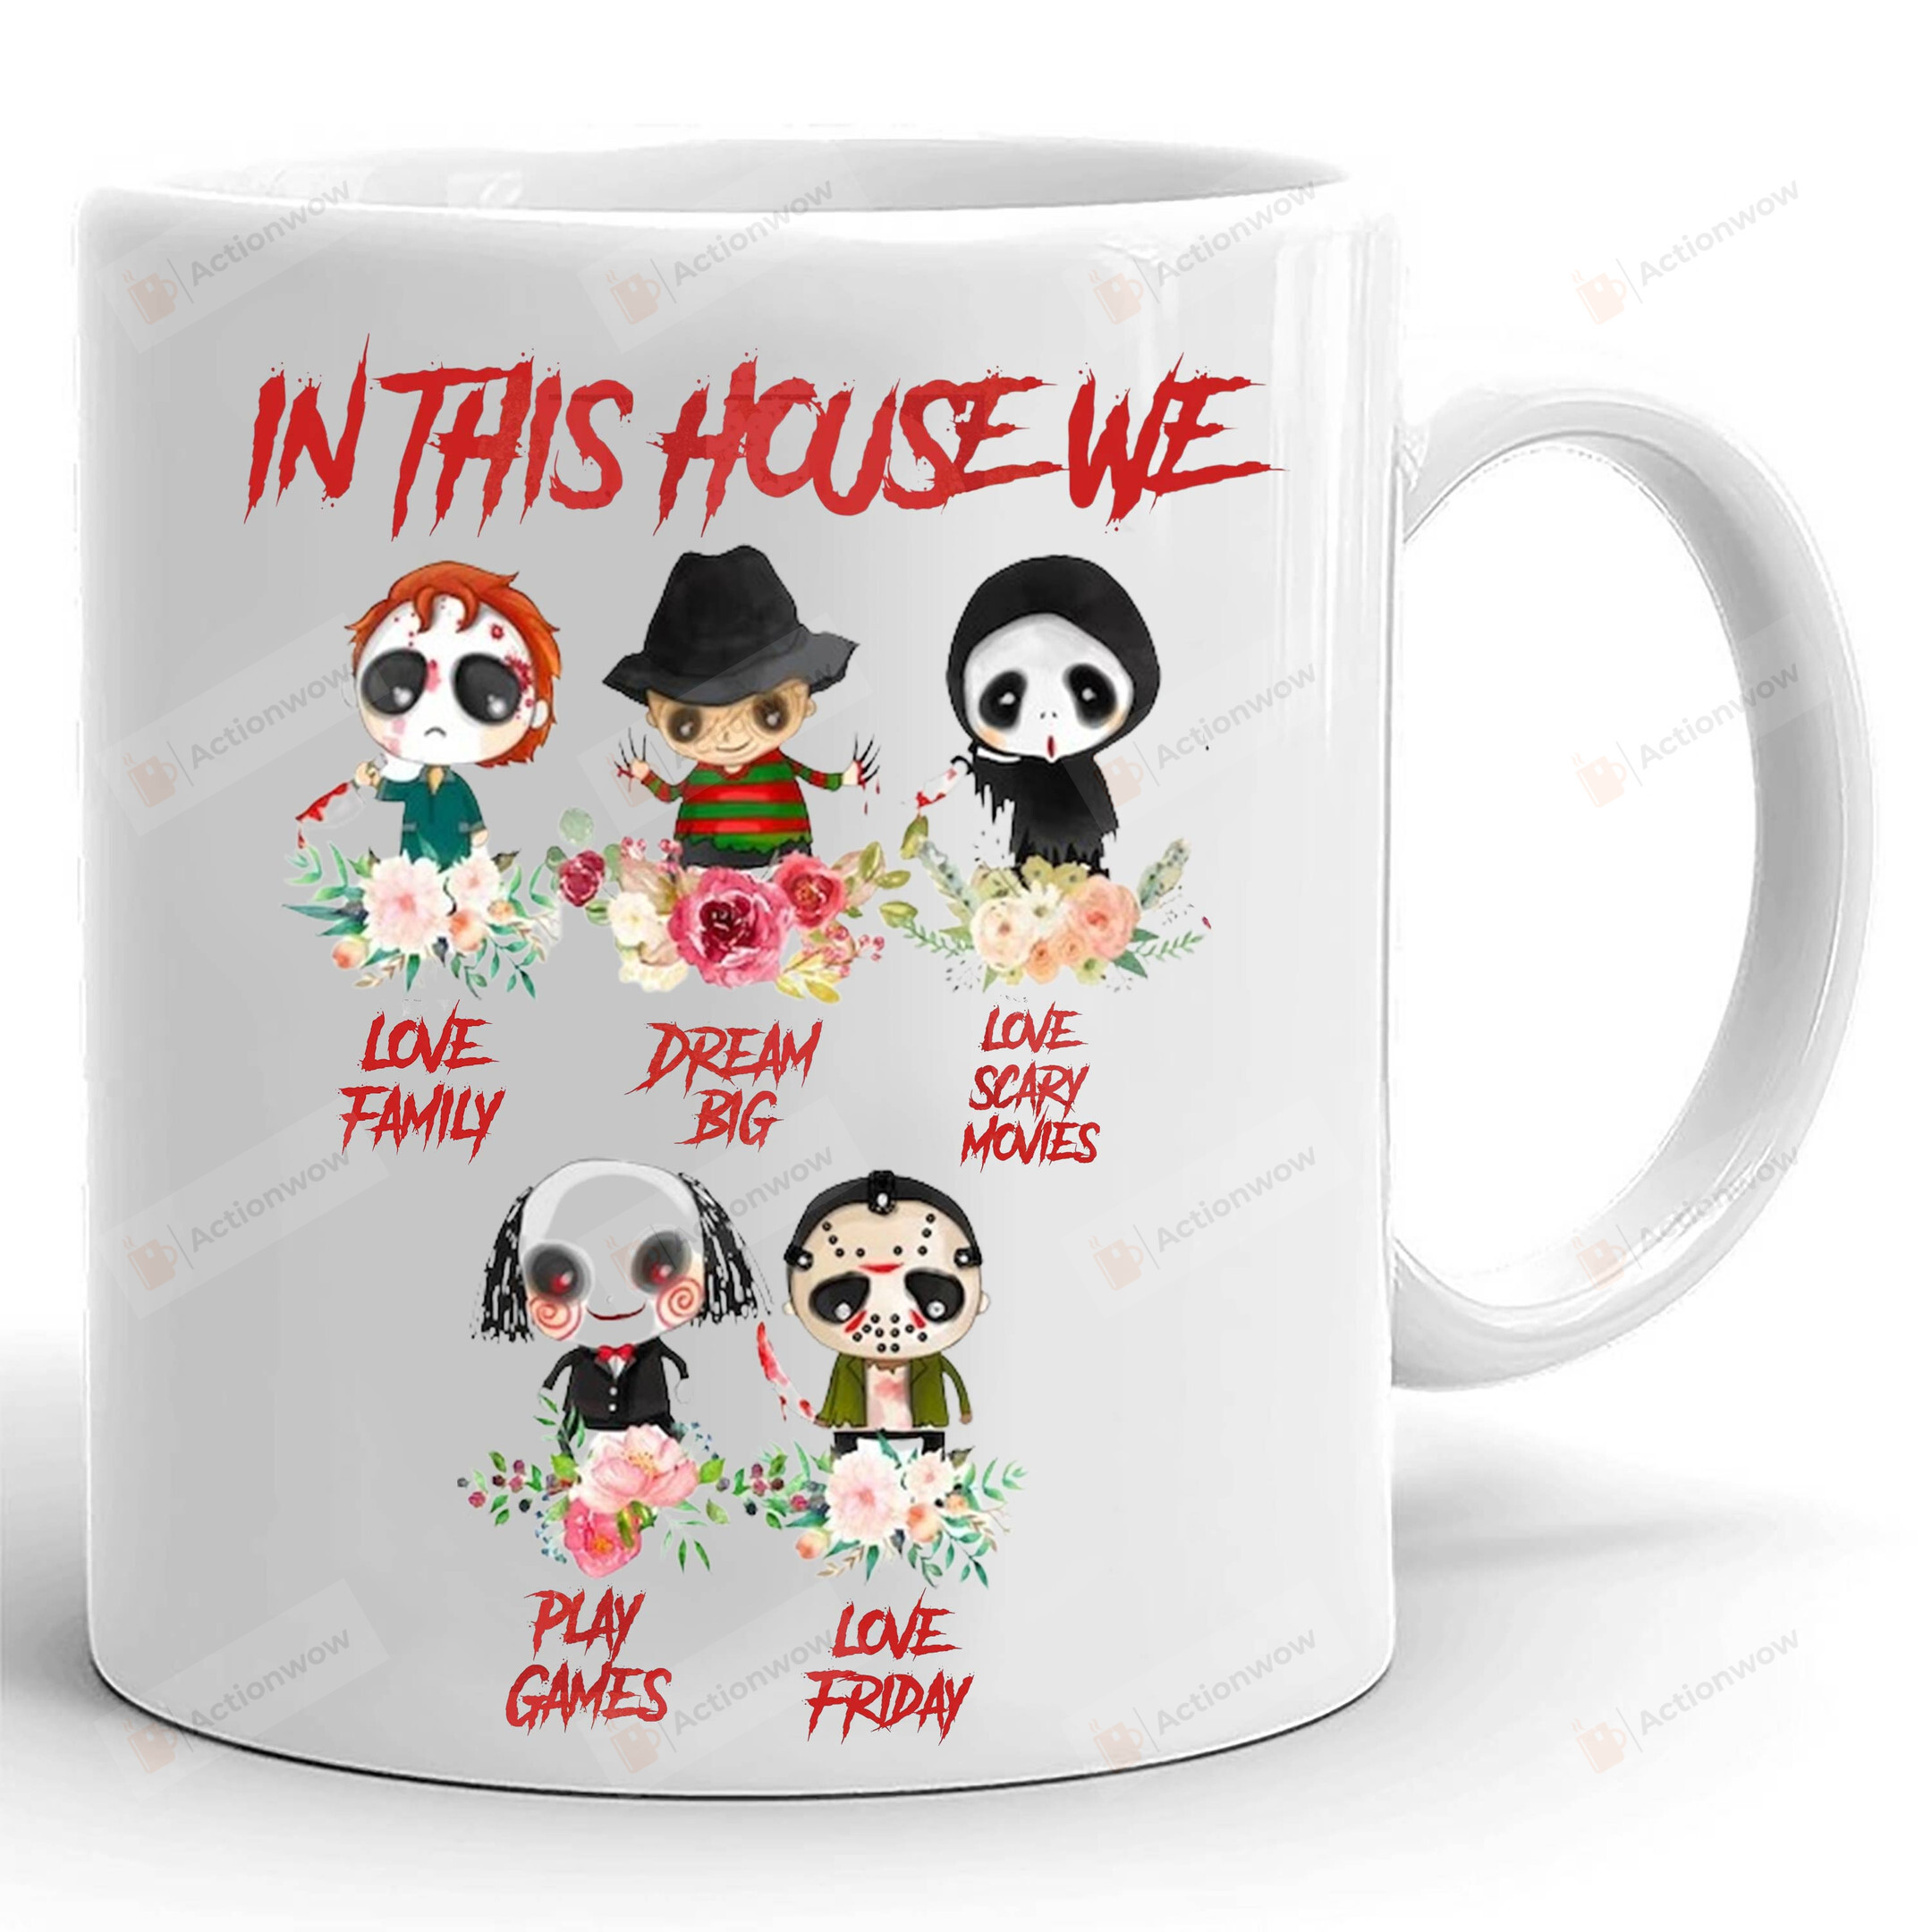 In This House We Love Family Dream Big Like Scary Movies Play Games Love Friday Mug, Horror Characters Mug, Movie Killers, Horror Movies